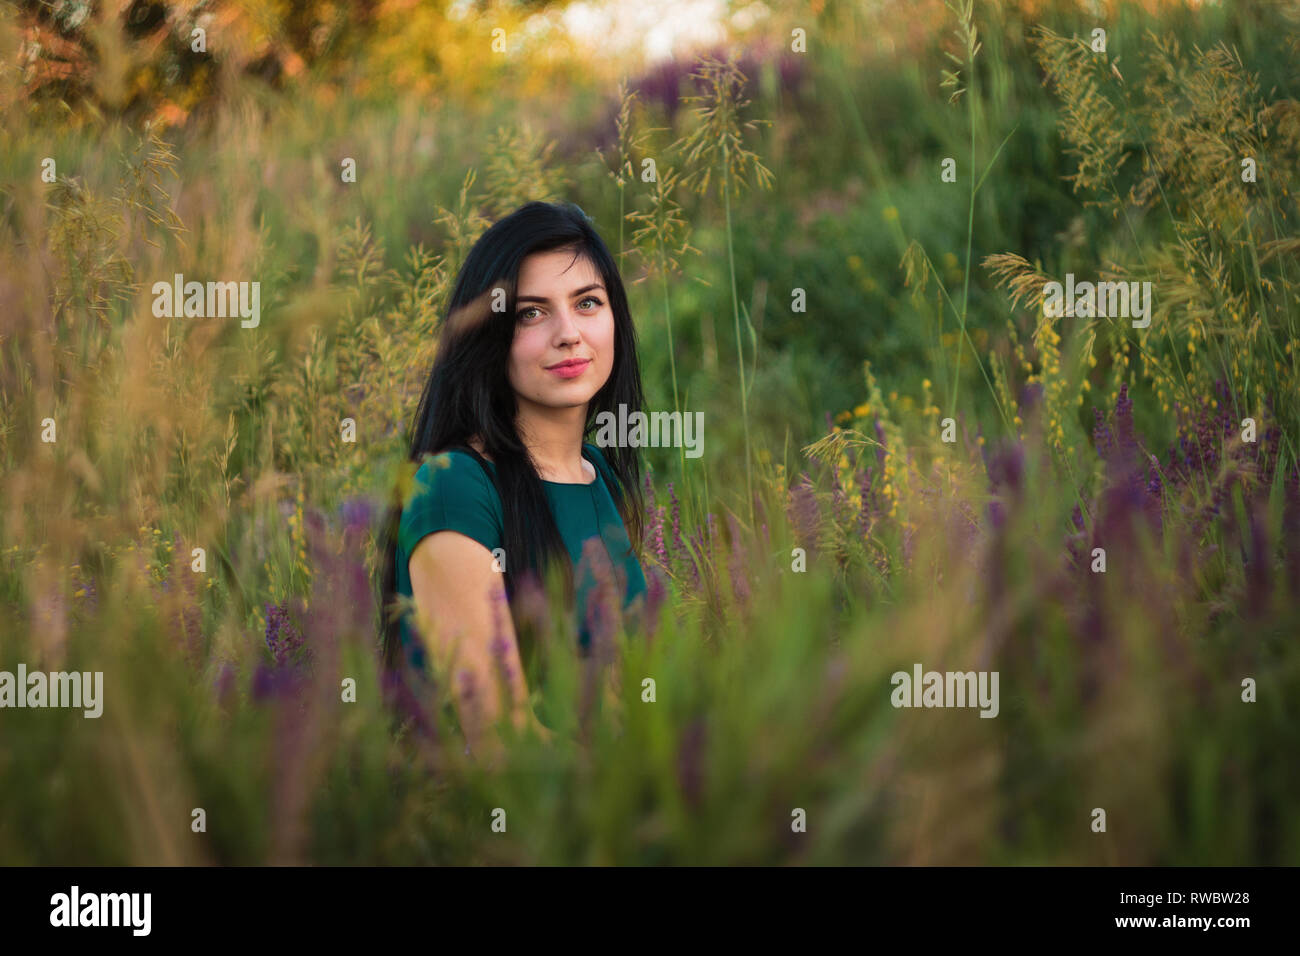 Beautiful Young Girl With Black Hair And Green Eyes Sitting In The Grass And Violet Flowers On Green Background In Dnipropetrovsk Region Ukraine Stock Photo Alamy